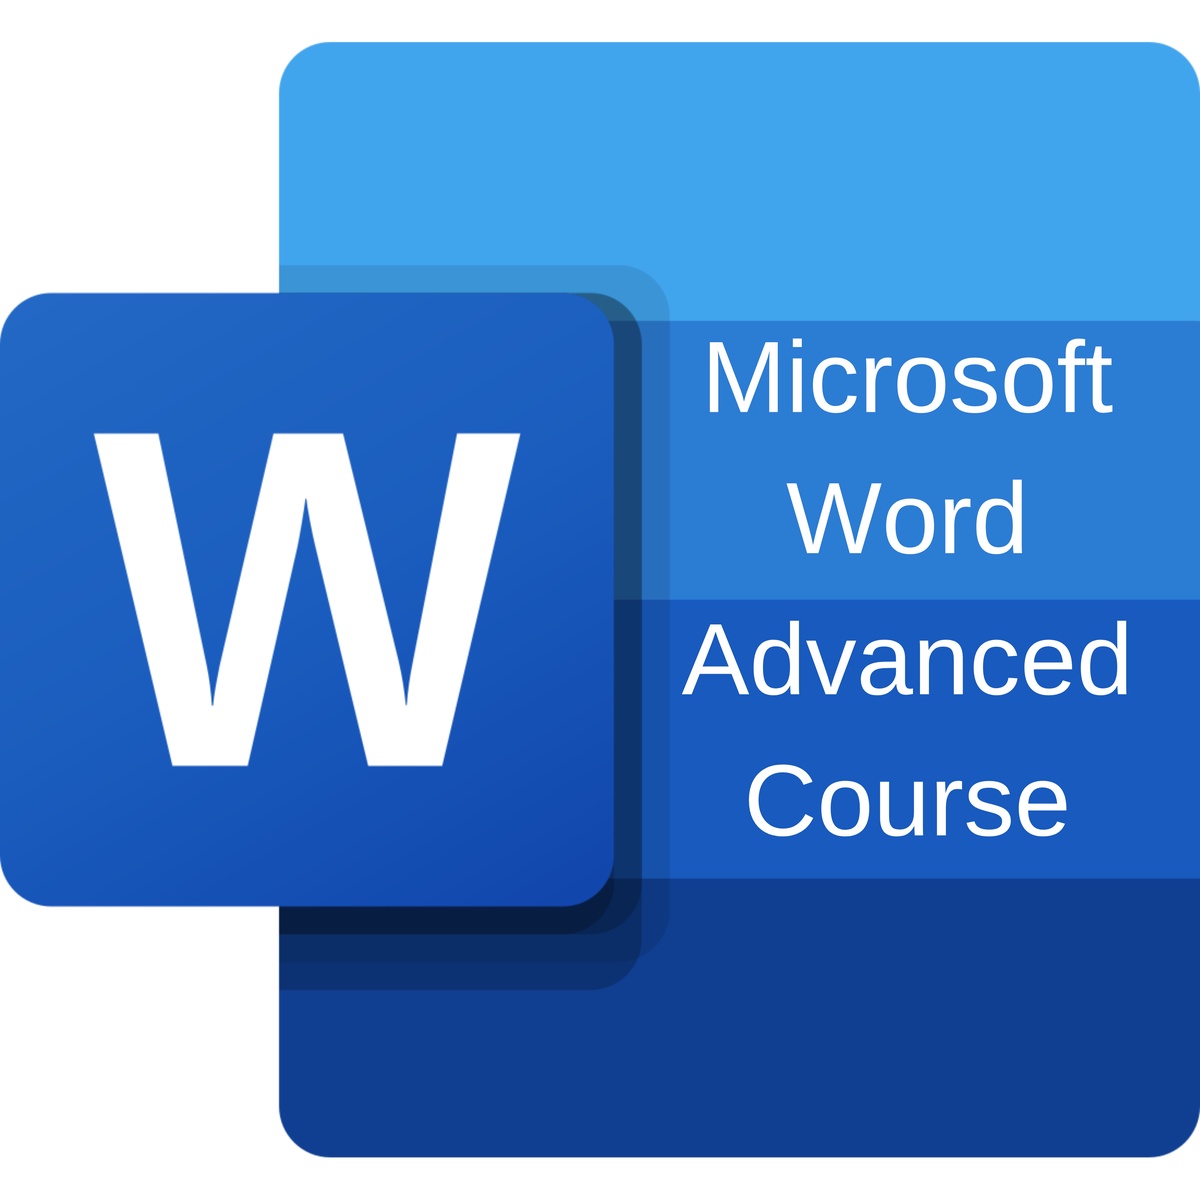 Logitrain's Microsoft Word Advanced Course: Elevating Your Skills Down Under